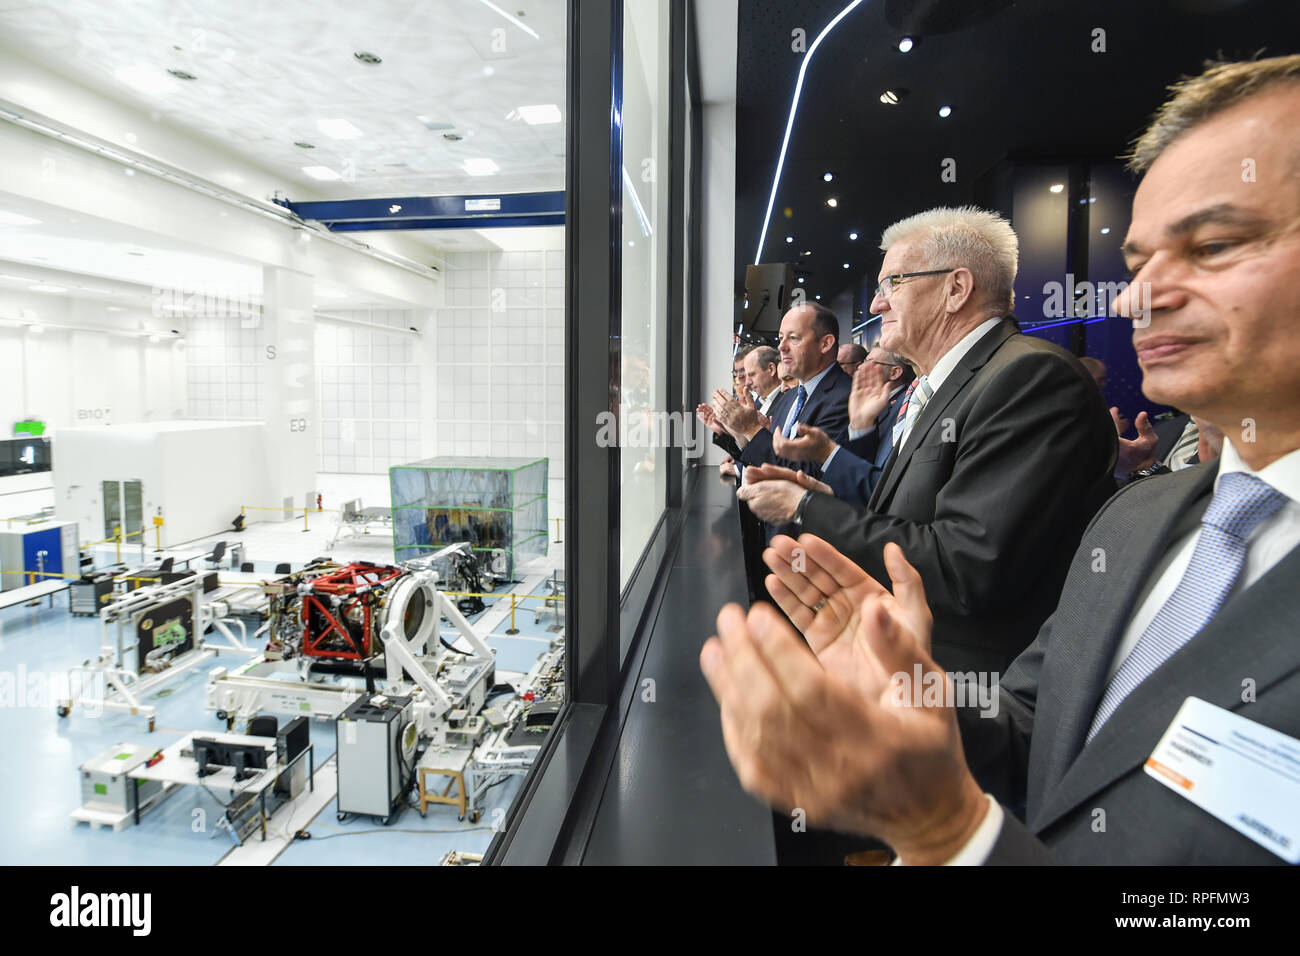 22 February 2019, Baden-Wuerttemberg, Immenstaad: Andreas Hammer (r-l),  Space Coordinator of Airbus Germany, Winfried Kretschmann (Bündnis  90/Grüne), Prime Minister of Baden-Württemberg, and Nicolas Chamussy, Head  of Space Systems at Airbus, watch the